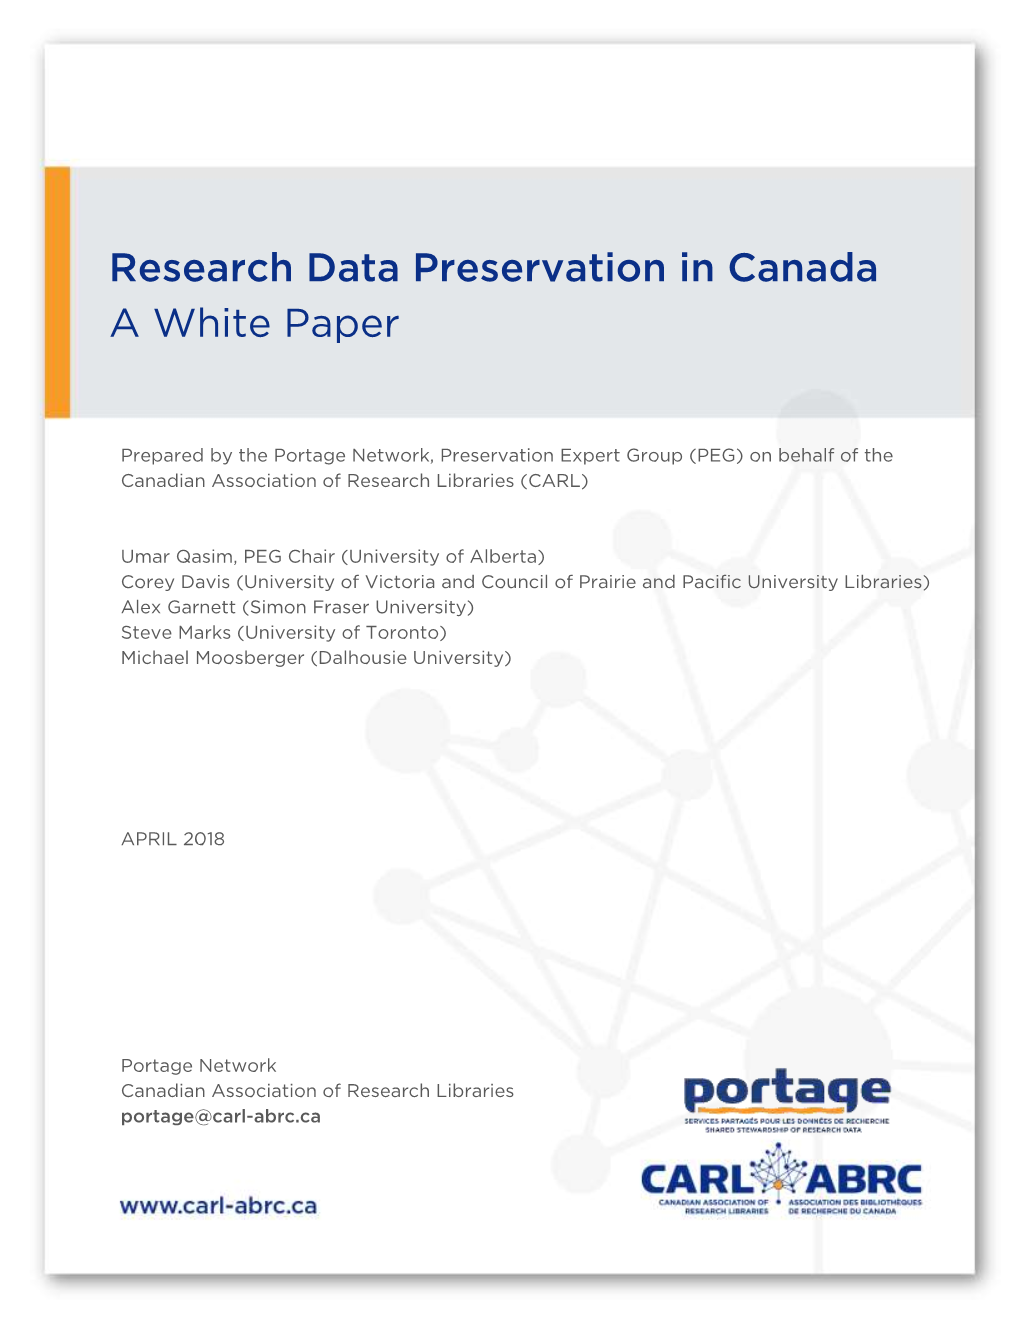 Research Data Preservation in Canada a White Paper